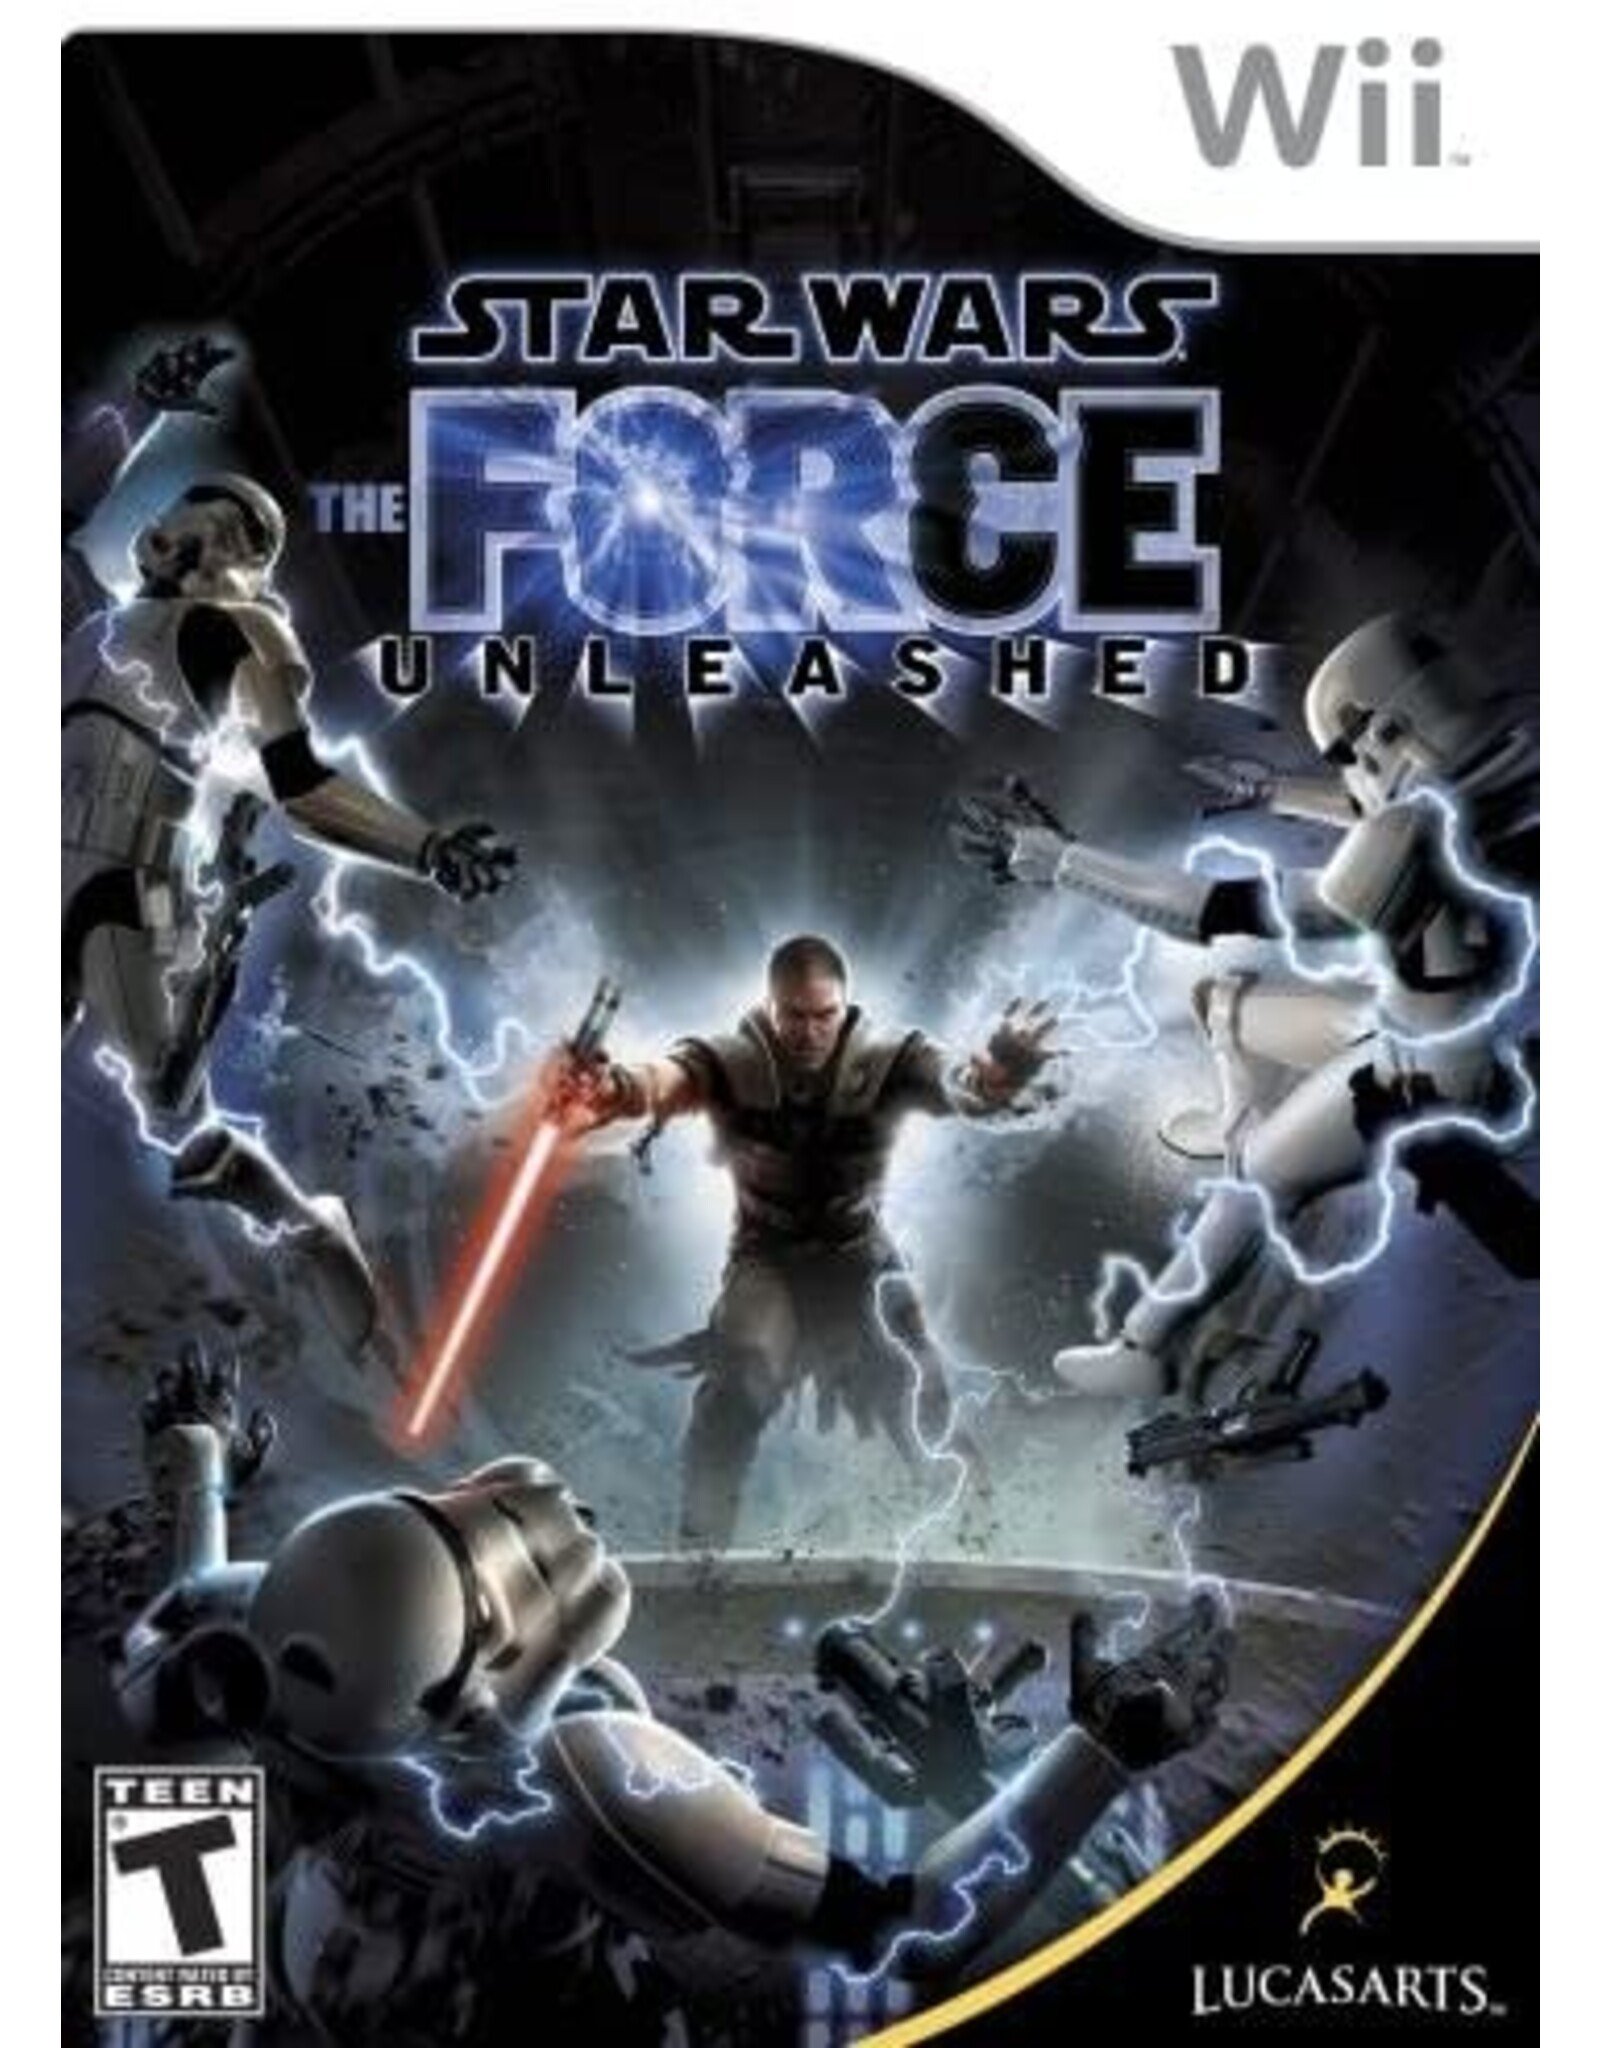 Wii Star Wars The Force Unleashed (CiB, Damaged Manual)